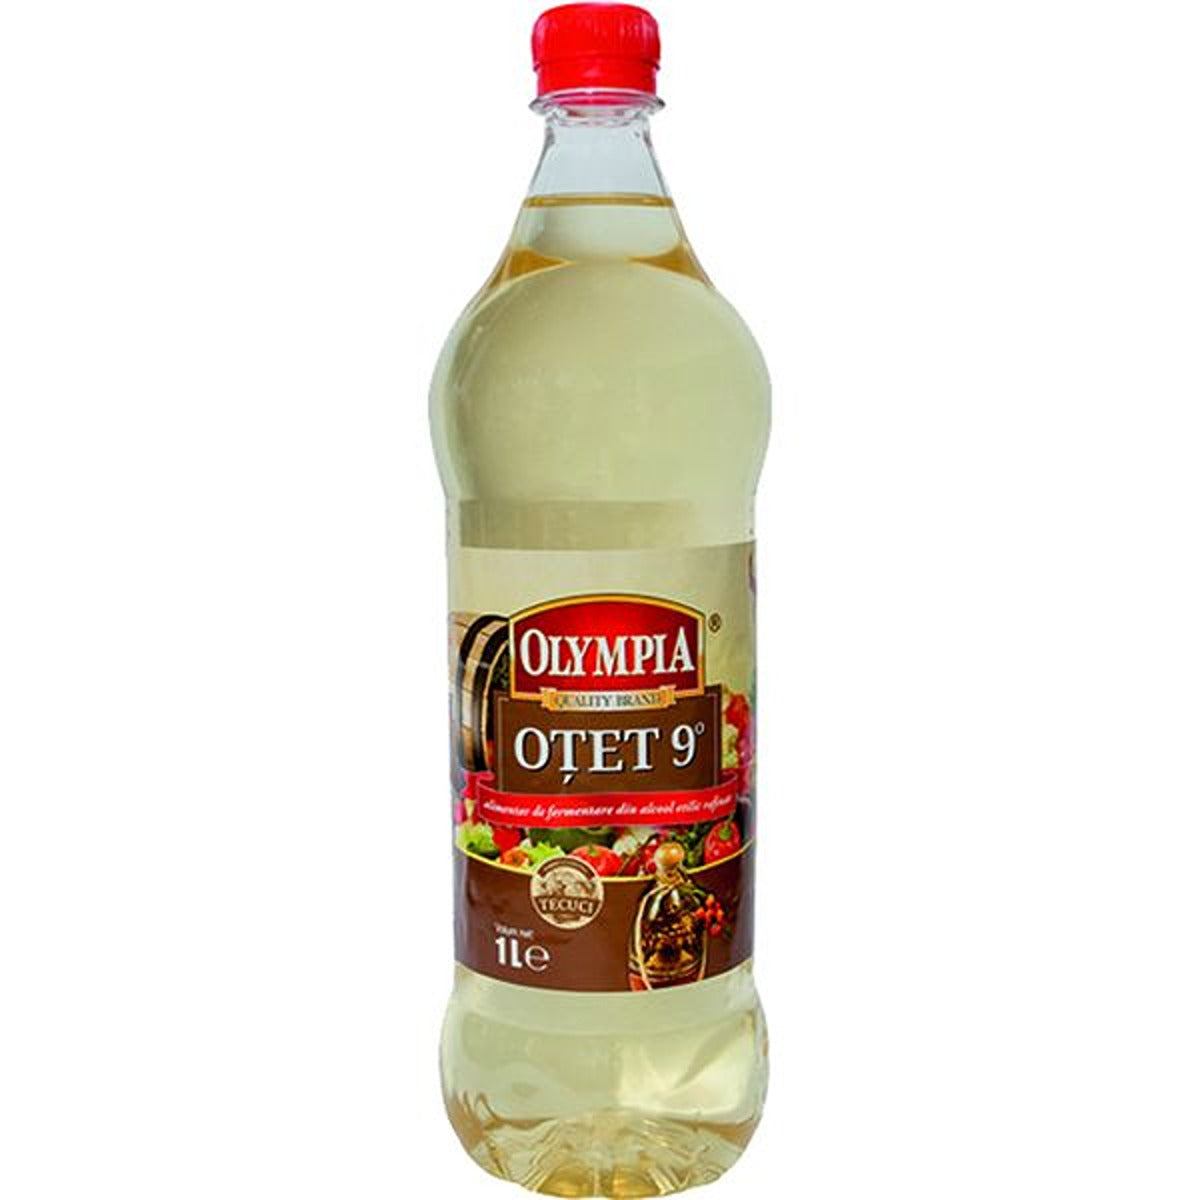 A bottle of Olympia Vinegar - 1L on a white background.